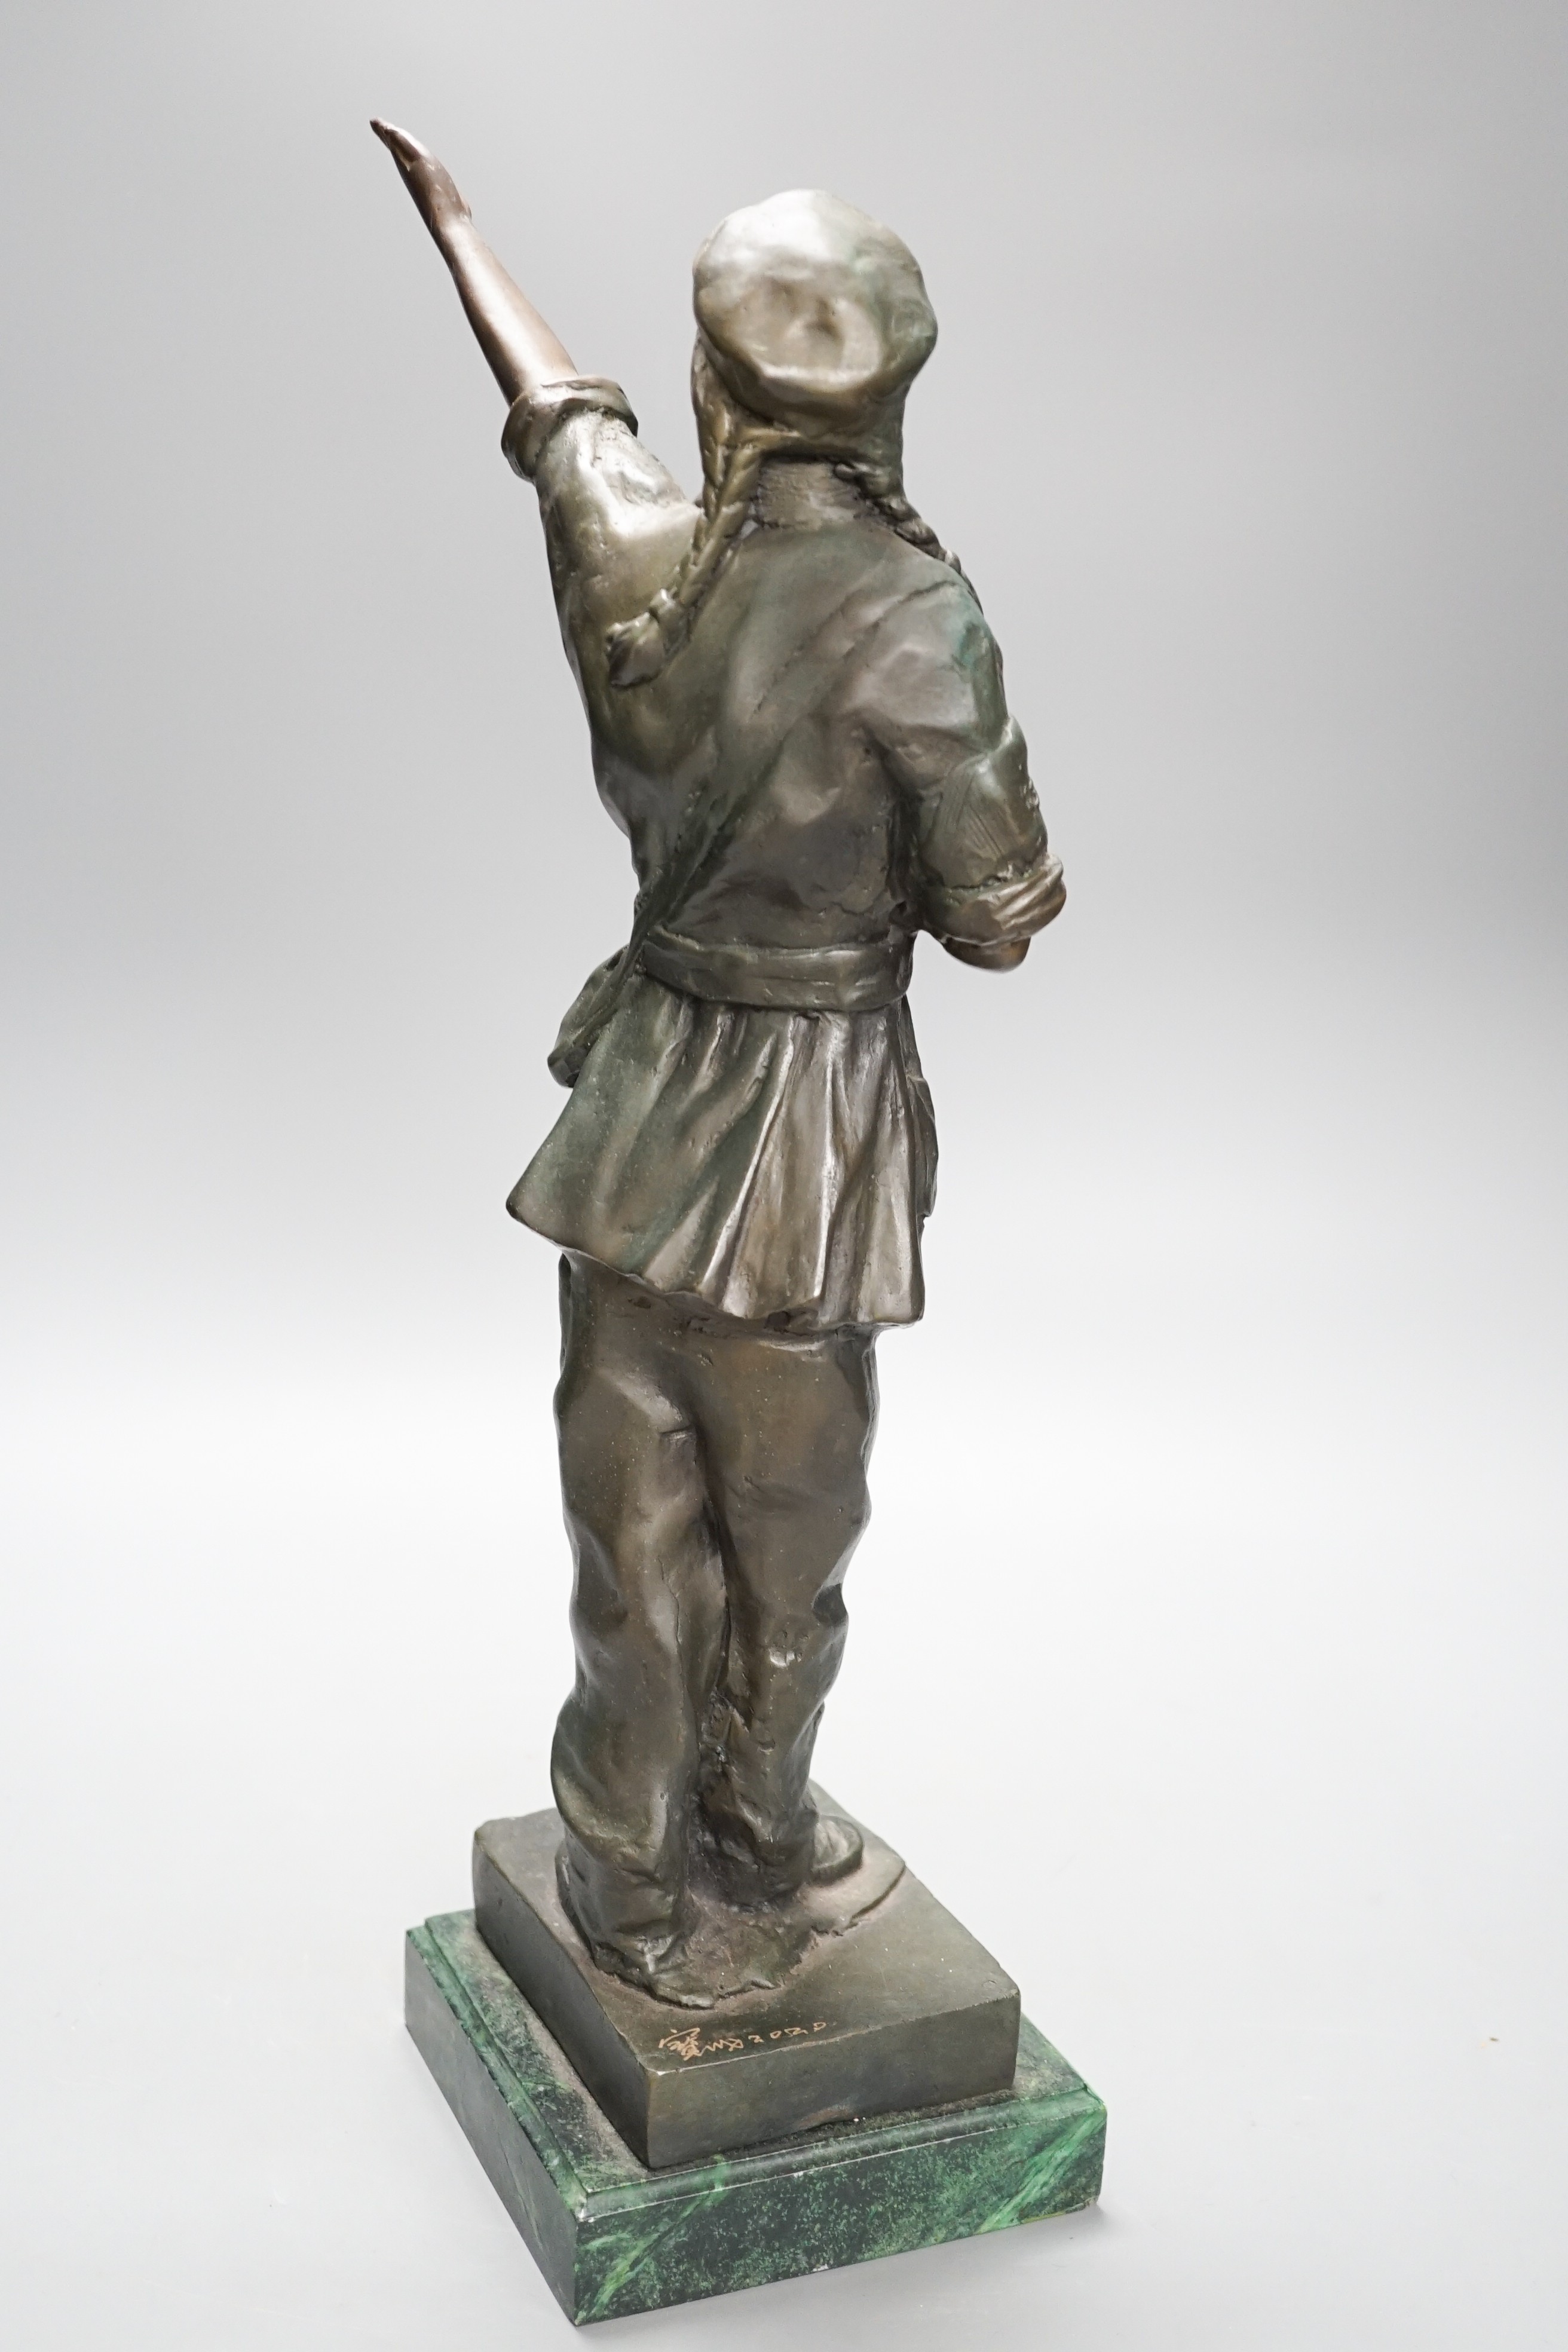 Le Bao bronze figure, a Red guard from Chinese revolutionary opera, 2020. 46cm - Image 4 of 6